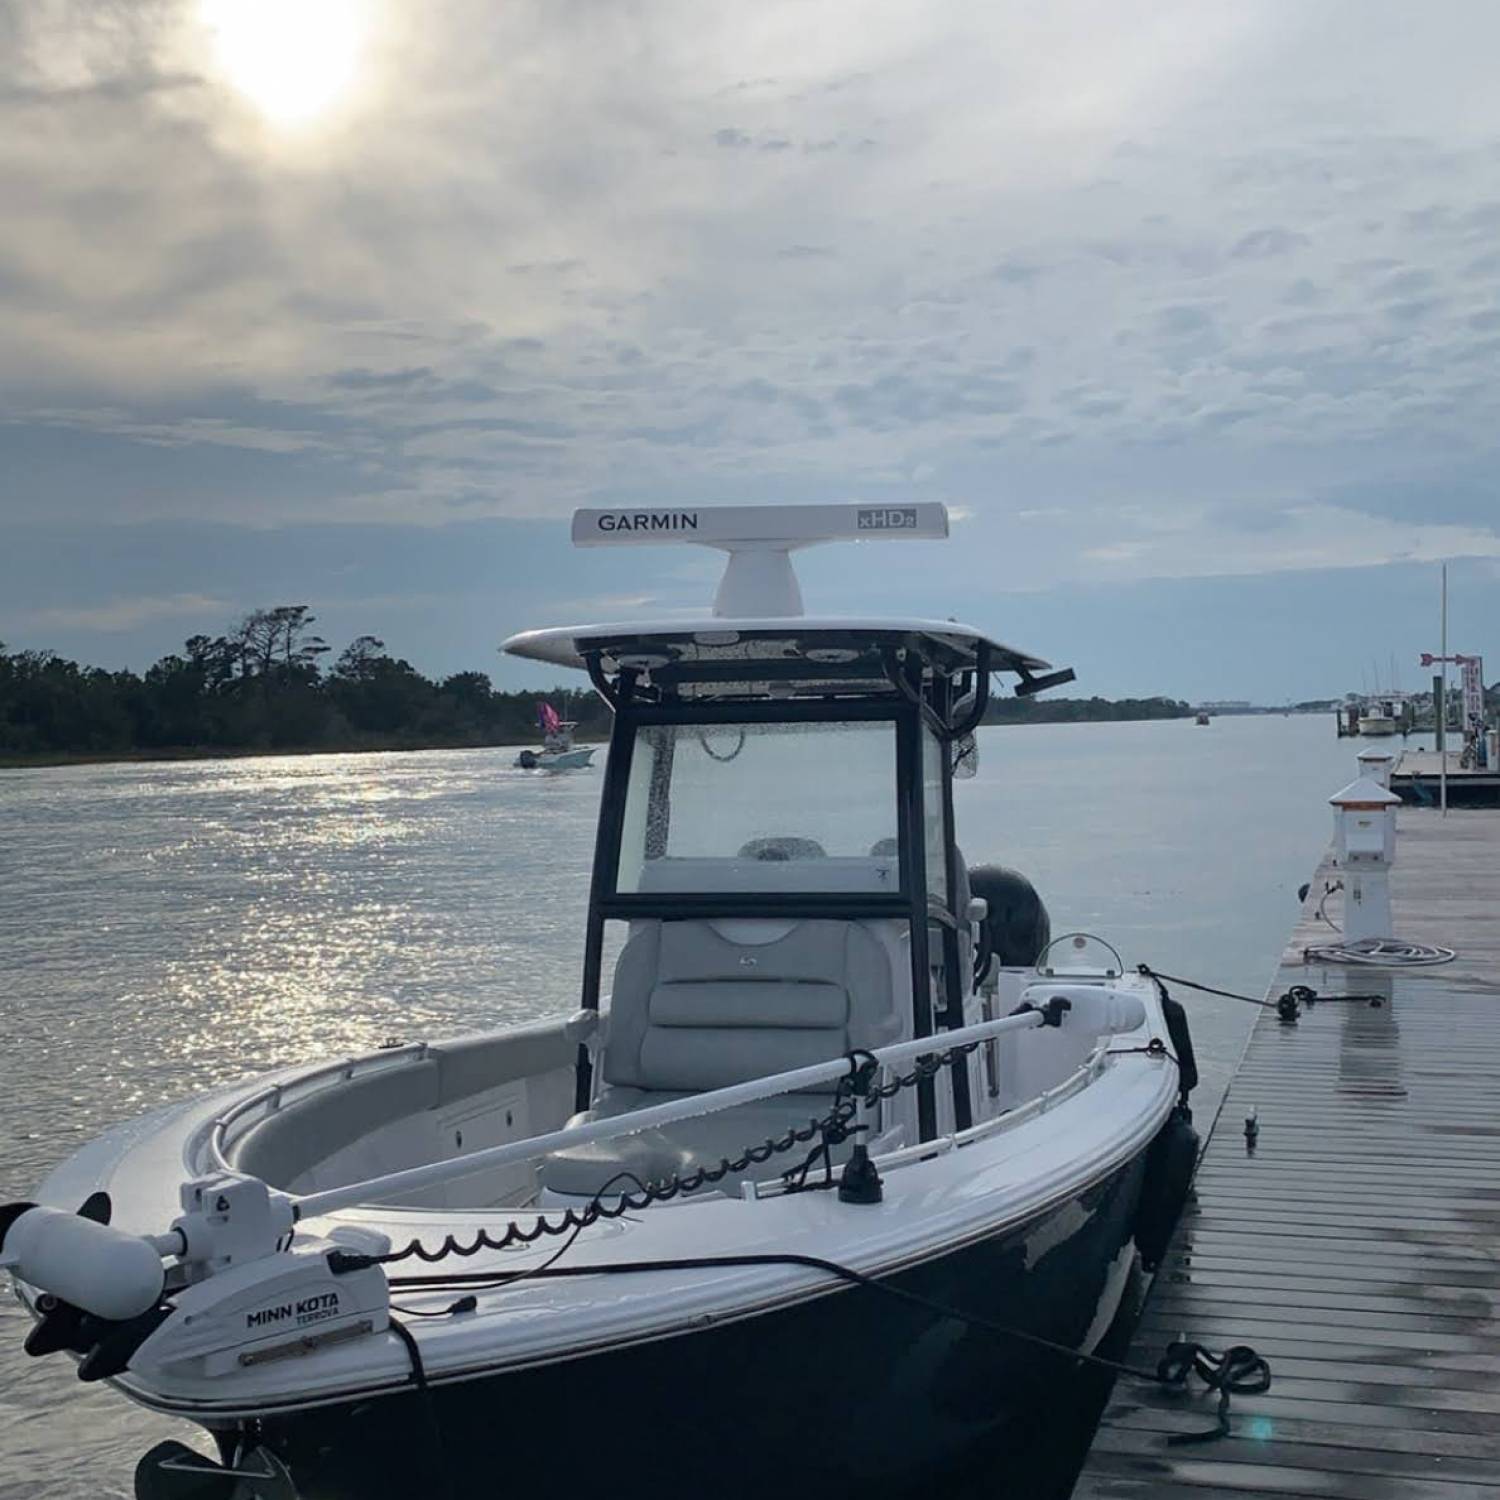 Title: Dockside - On board their Sportsman Open 282TE Center Console - Location: Beaufort nc. Participating in the Photo Contest #SportsmanAugust